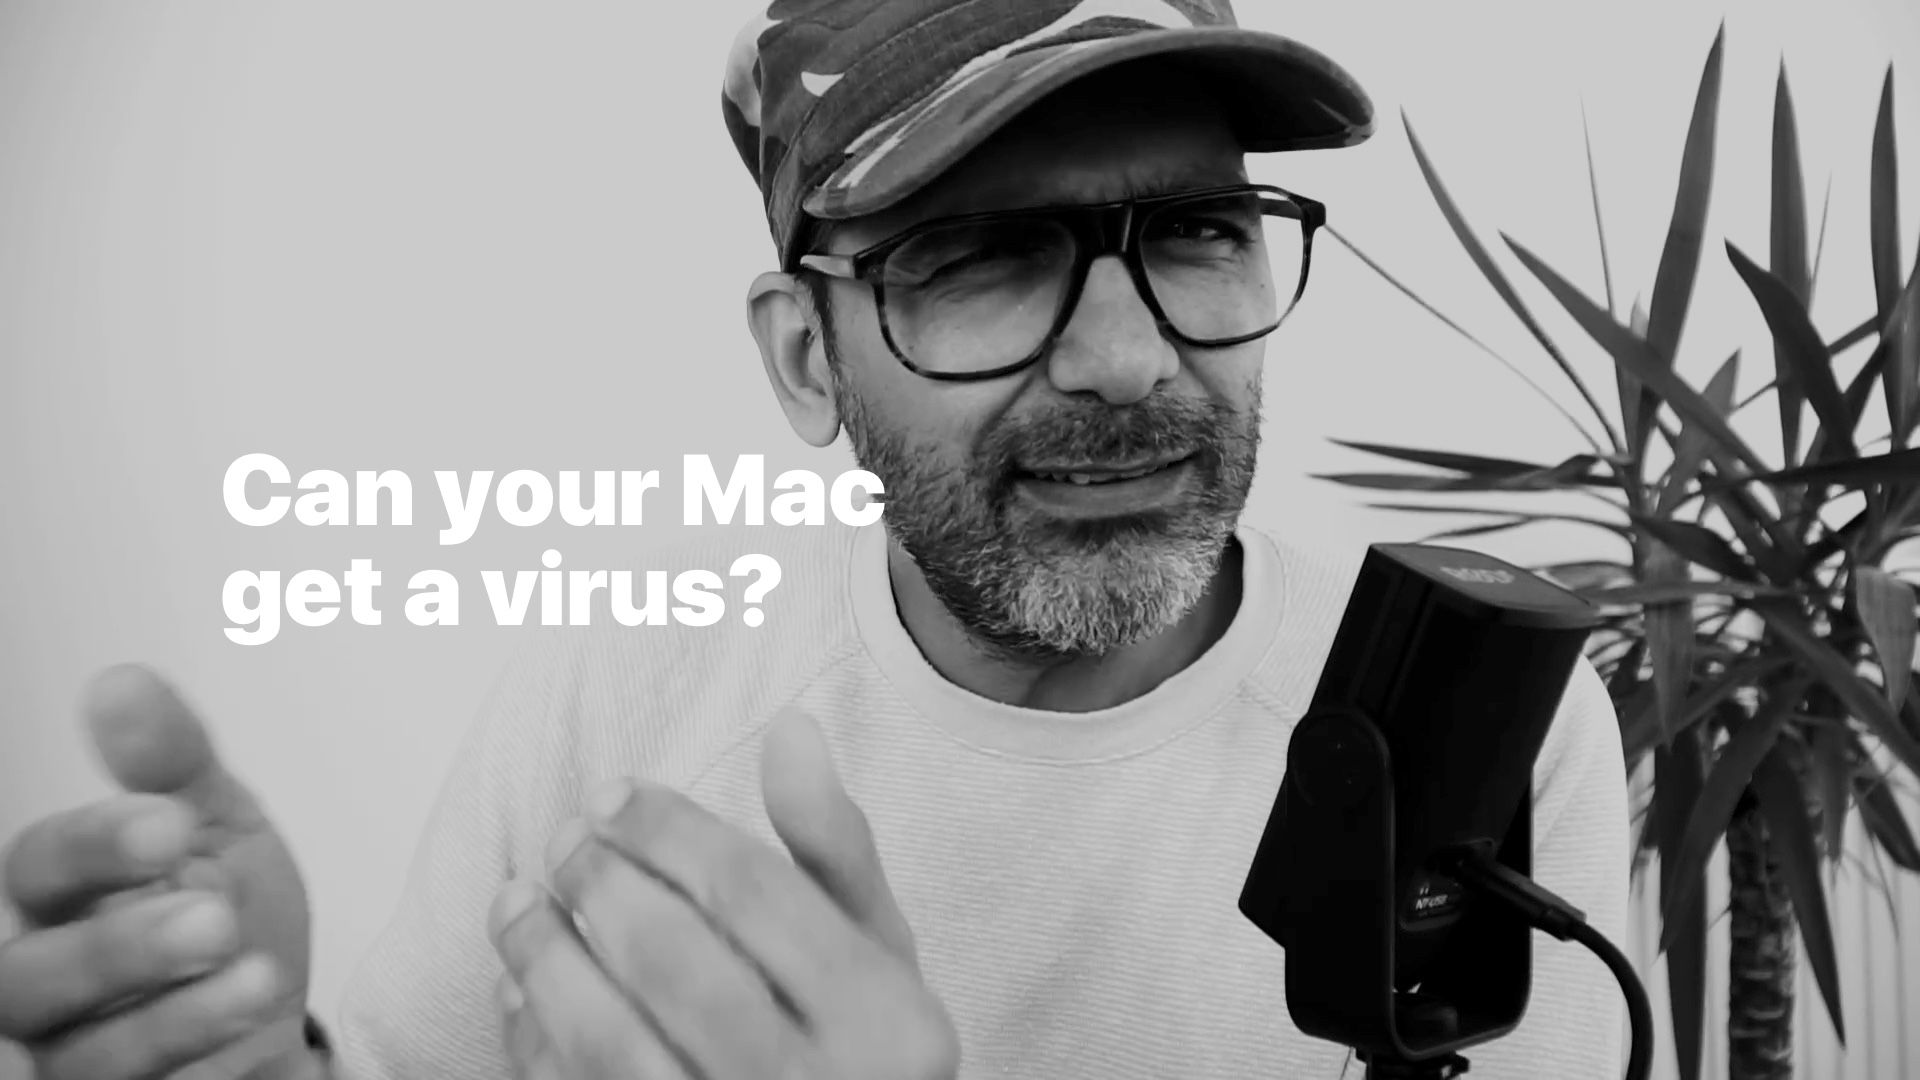 Can your Mac get a virus?